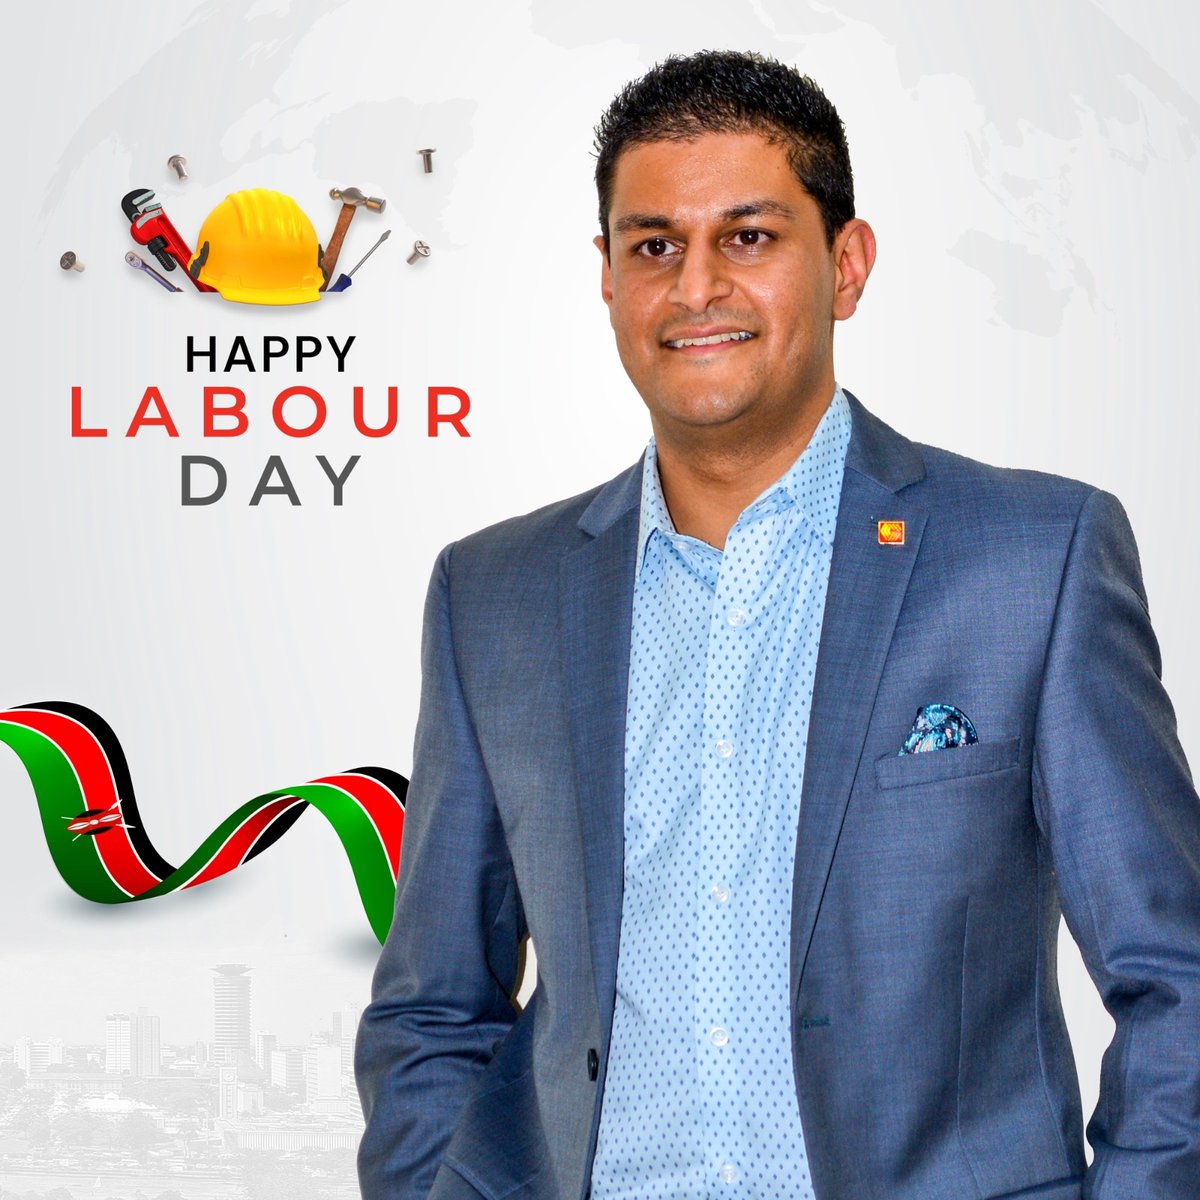 Today, we celebrate the power of perseverance and dedication. Every job, big or small, contributes to the fabric of society. Let's find hope and fulfilment in our industrial endeavours. Happy Labour Day to all and may our collective efforts continue to shape a brighter future for